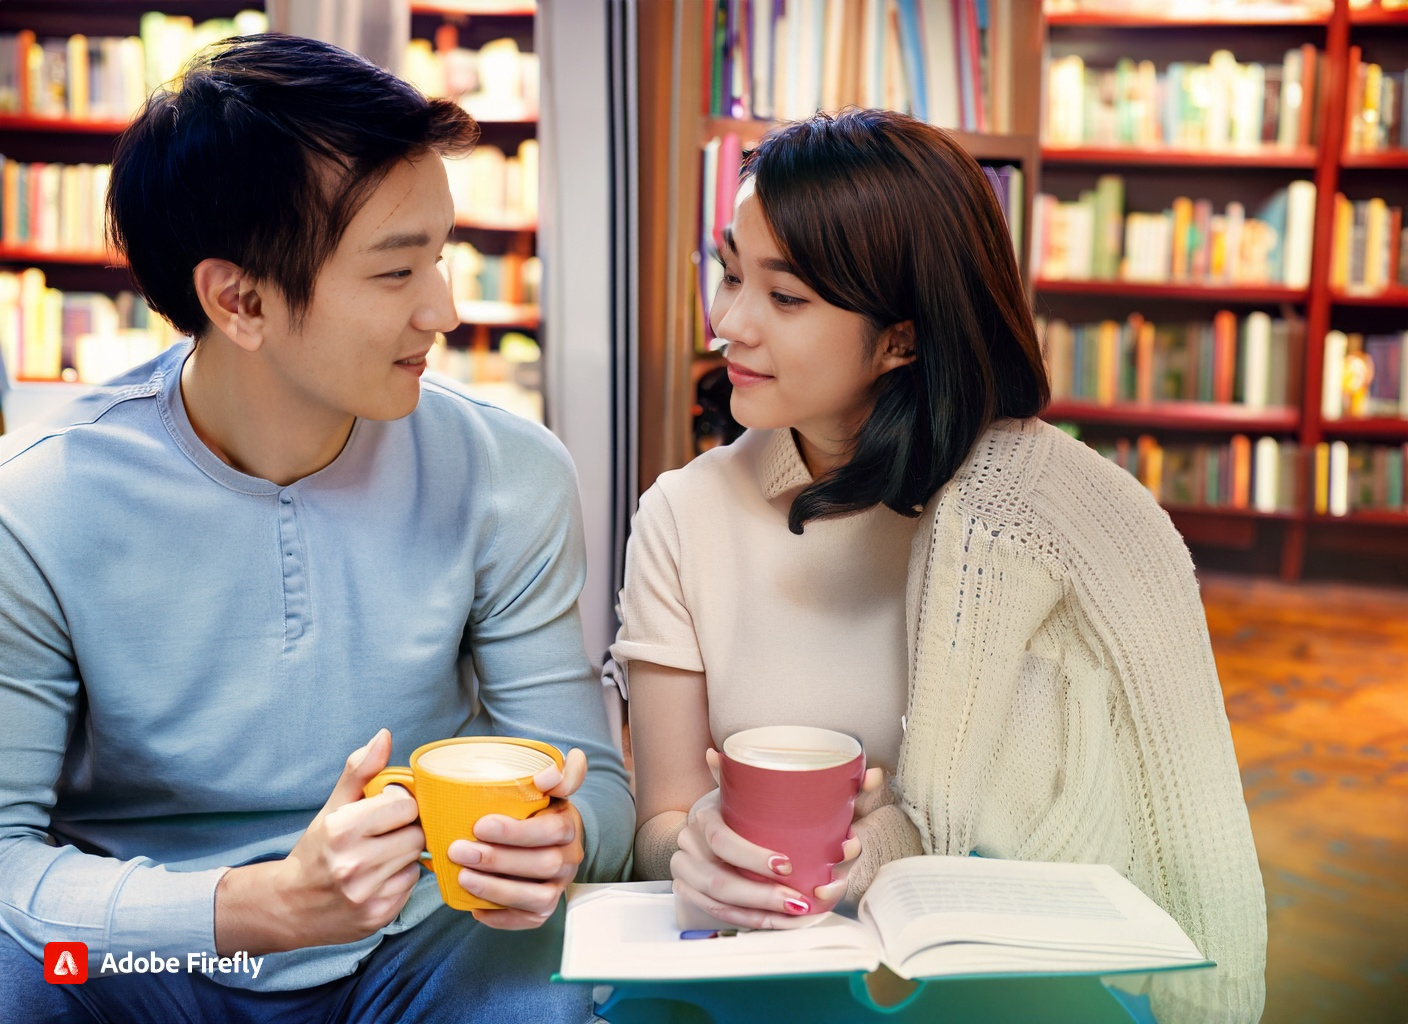 8 Bookstore Date Ideas You Need to Know: Exploring Literary World Together